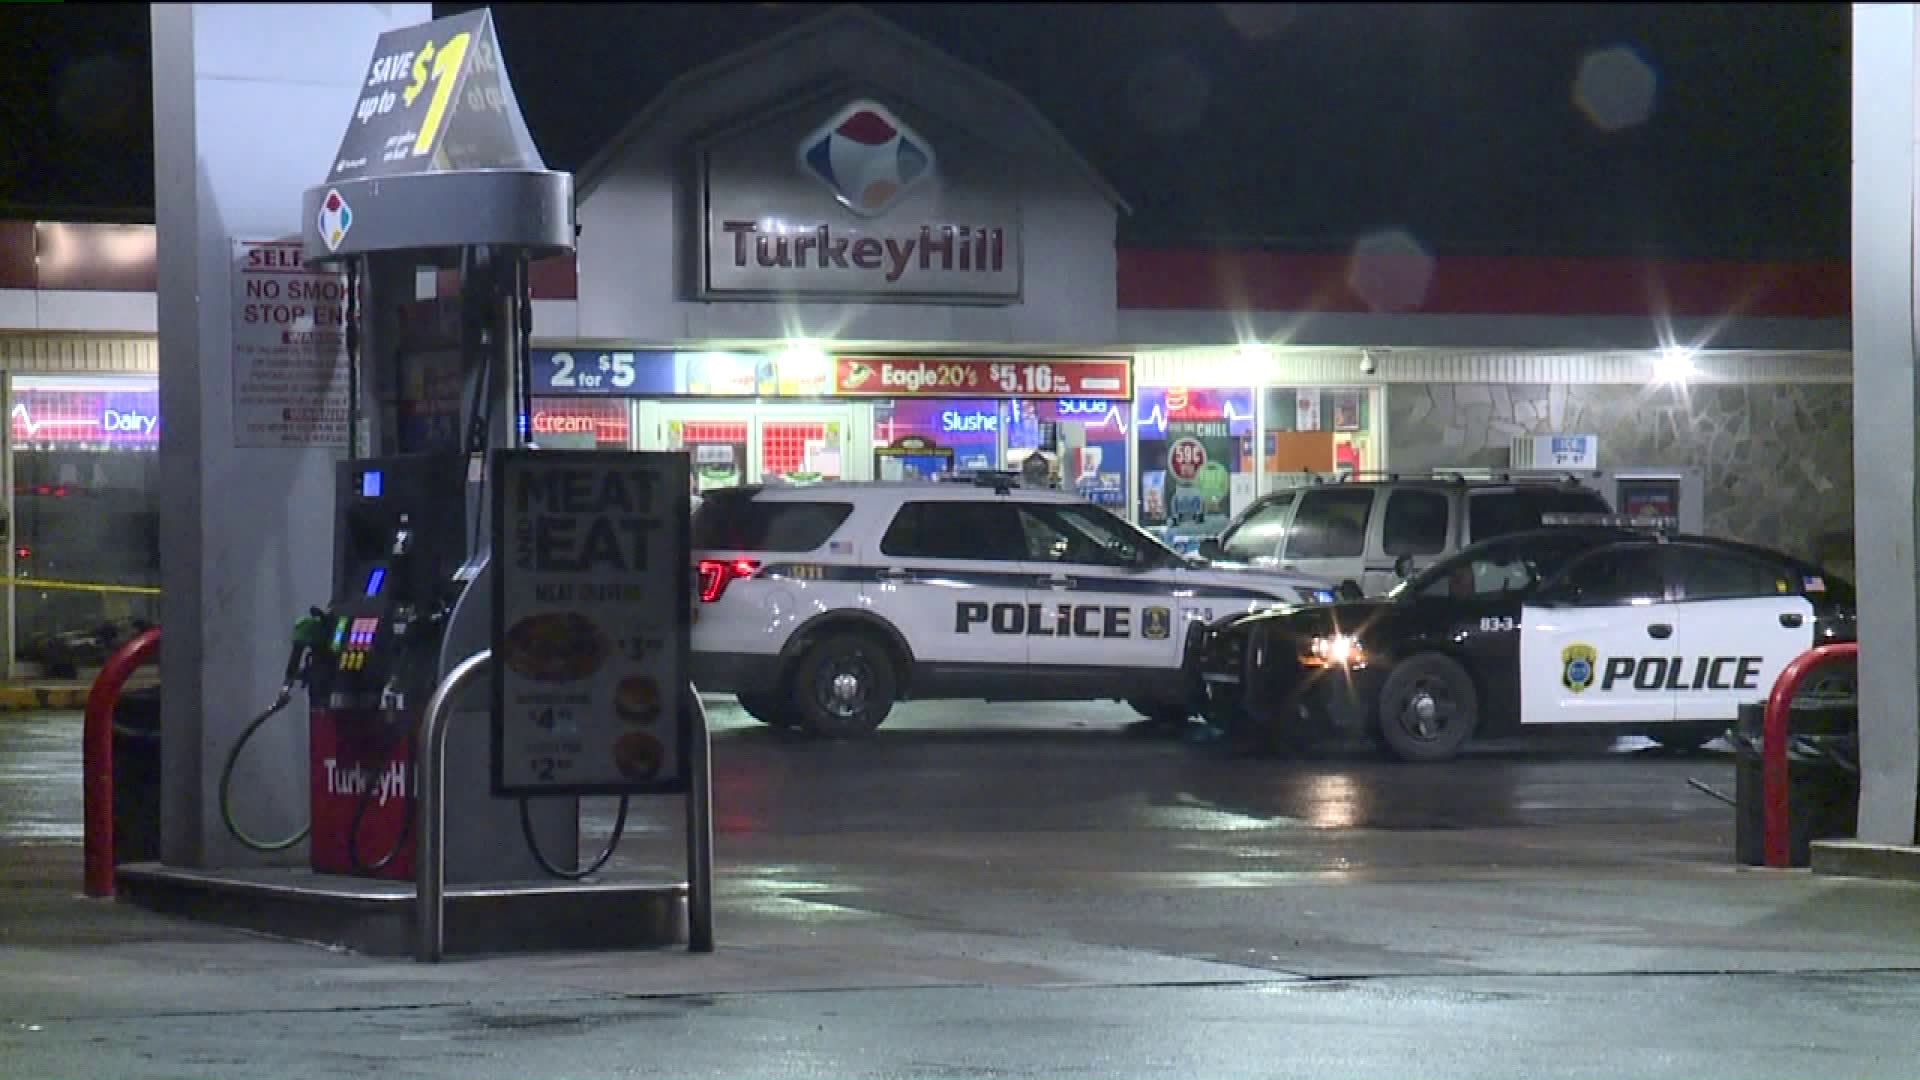 Turkey Hill Robbed For Second Time in Luzerne County